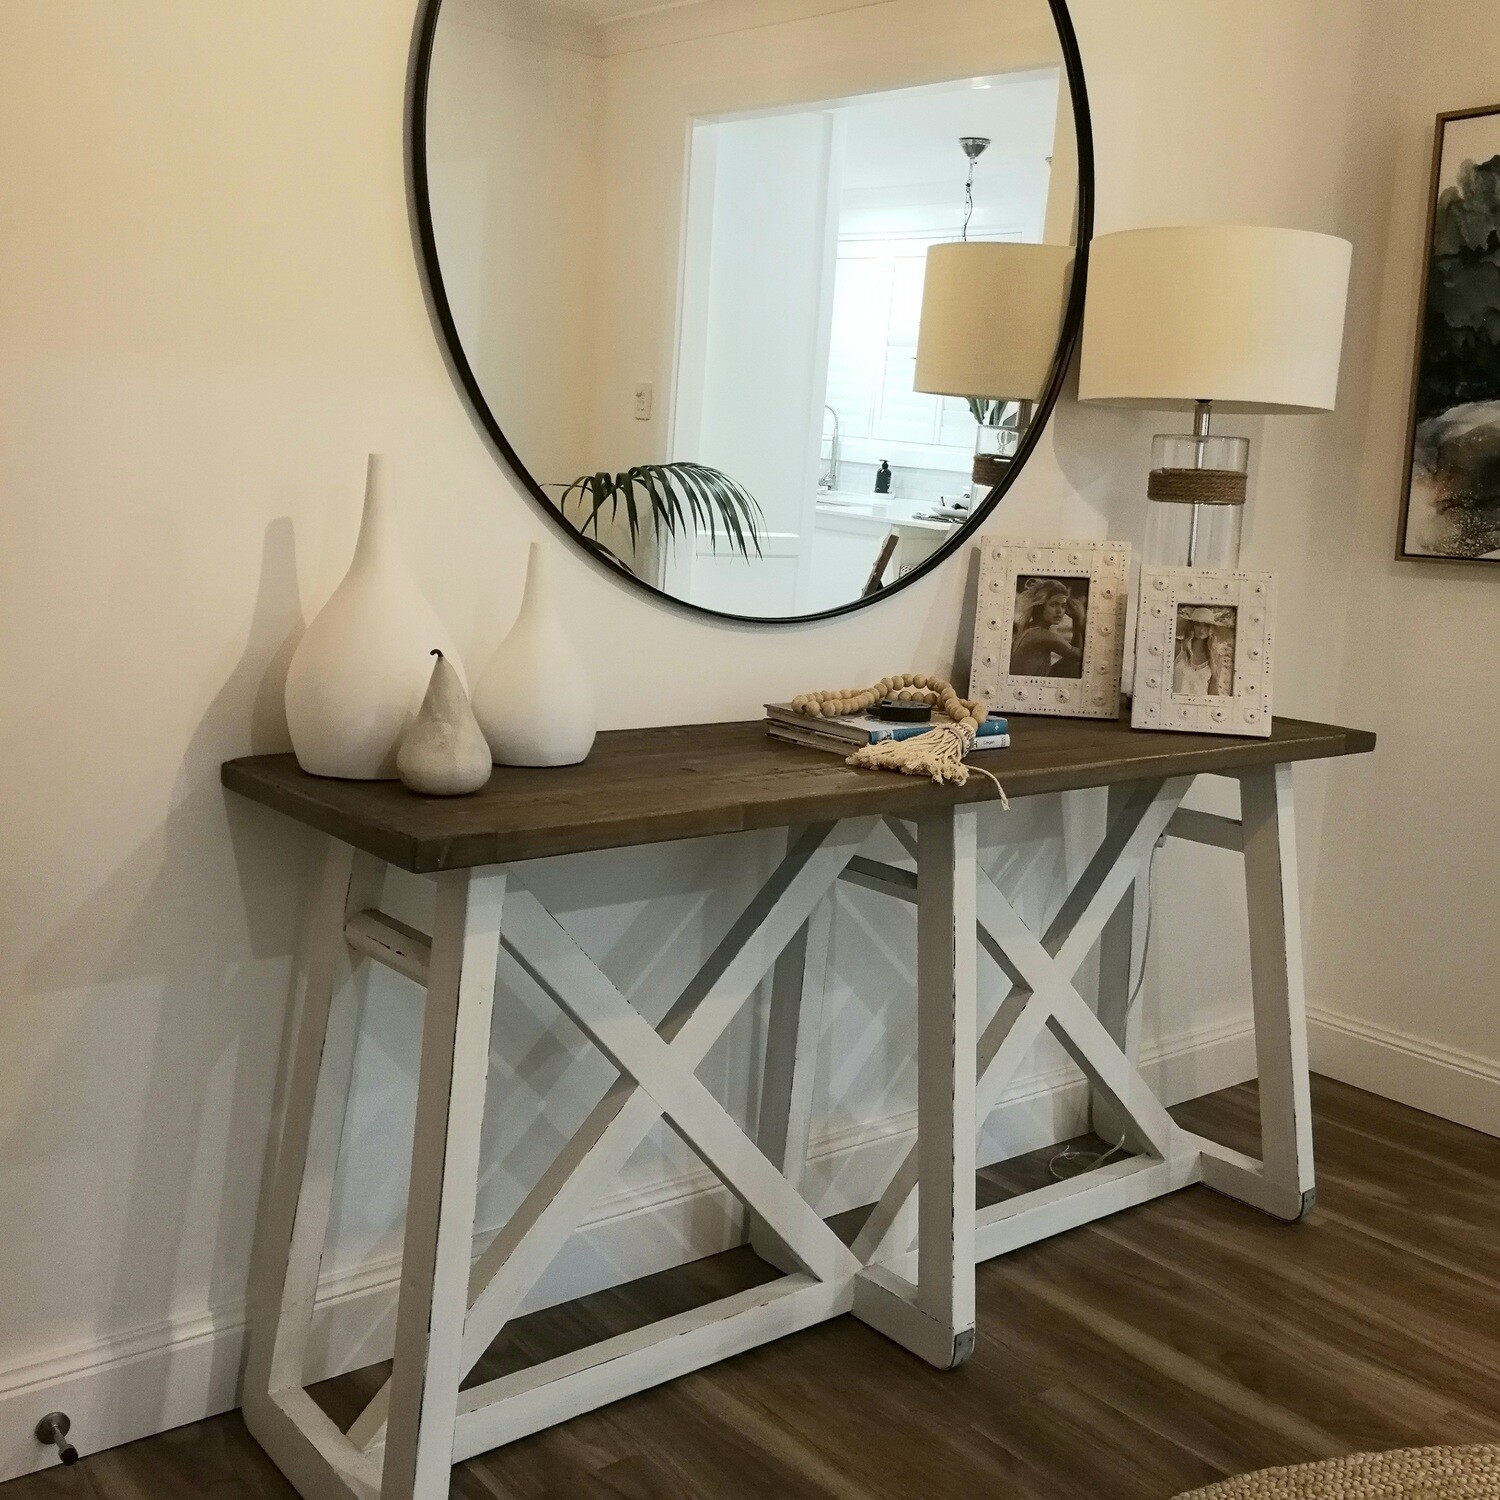 White Cross Console Table